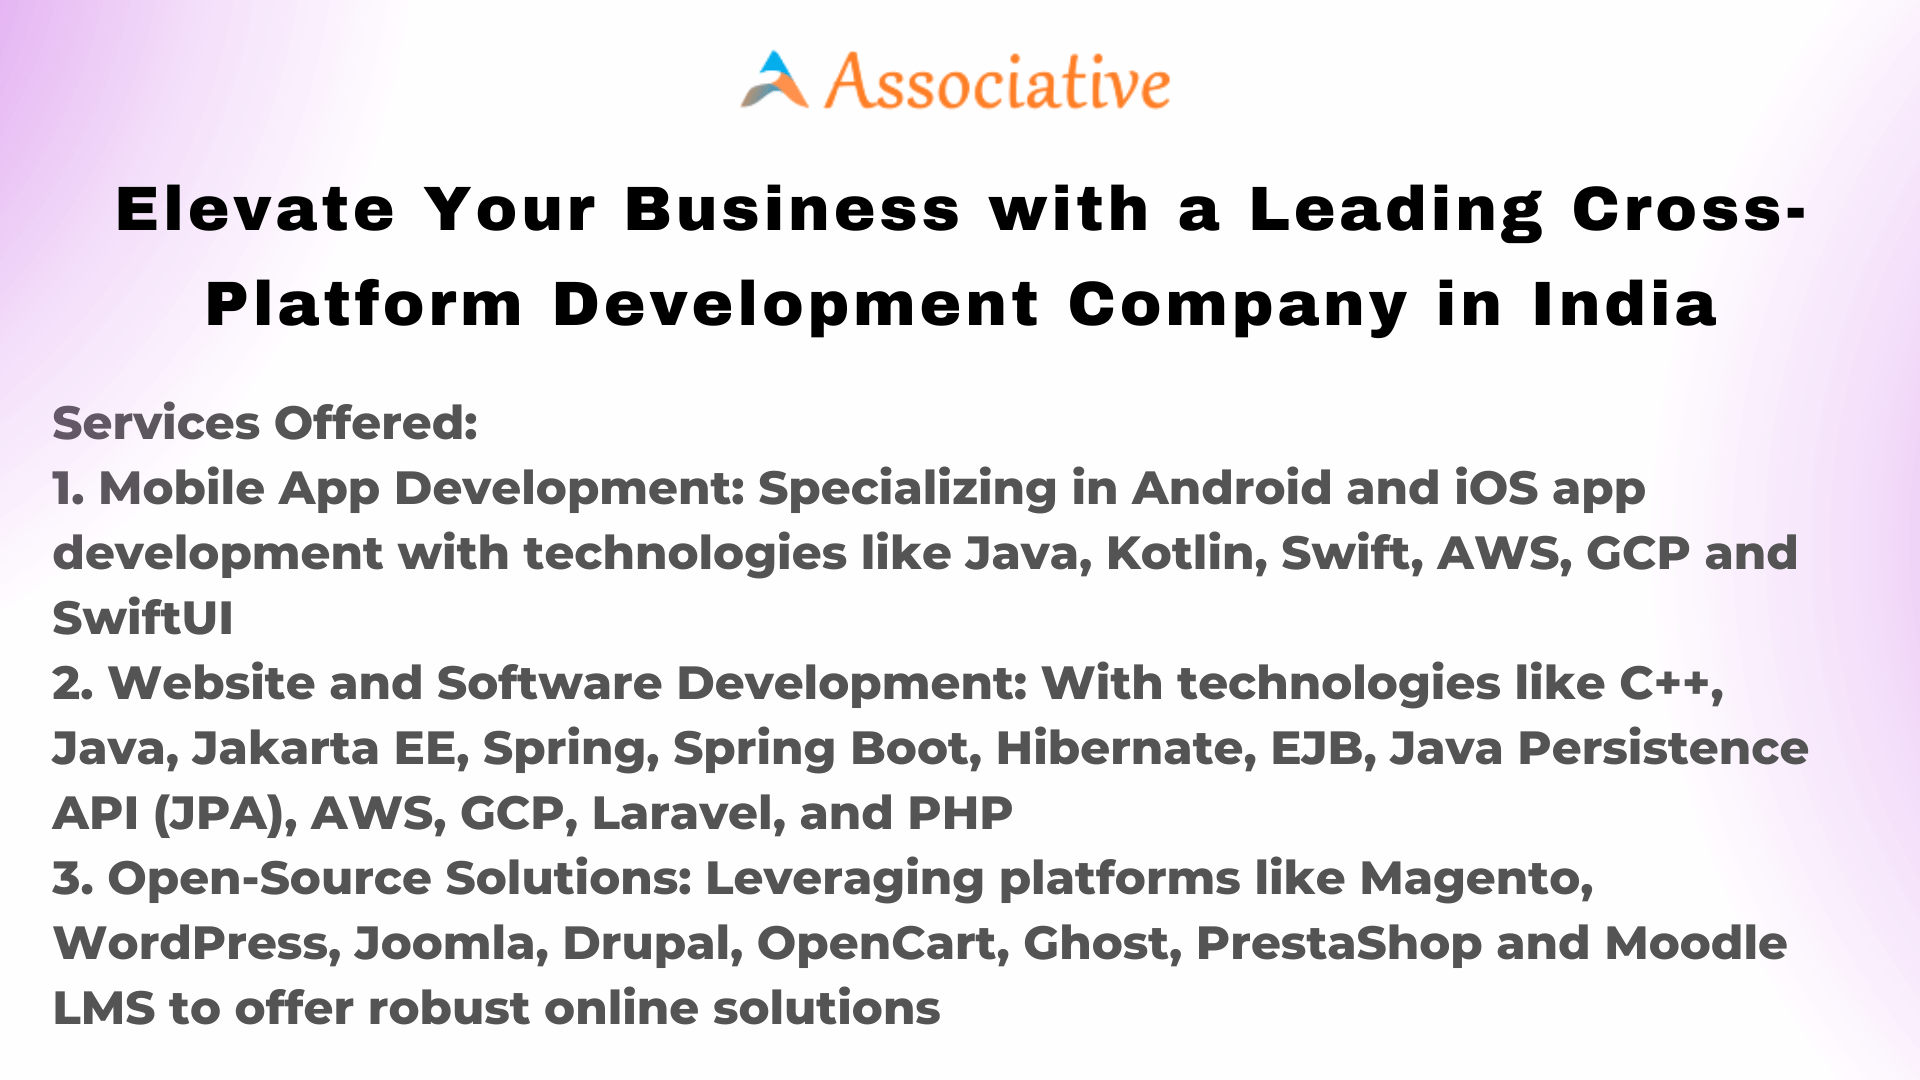 Elevate Your Business with a Leading Cross-Platform Development Company in India